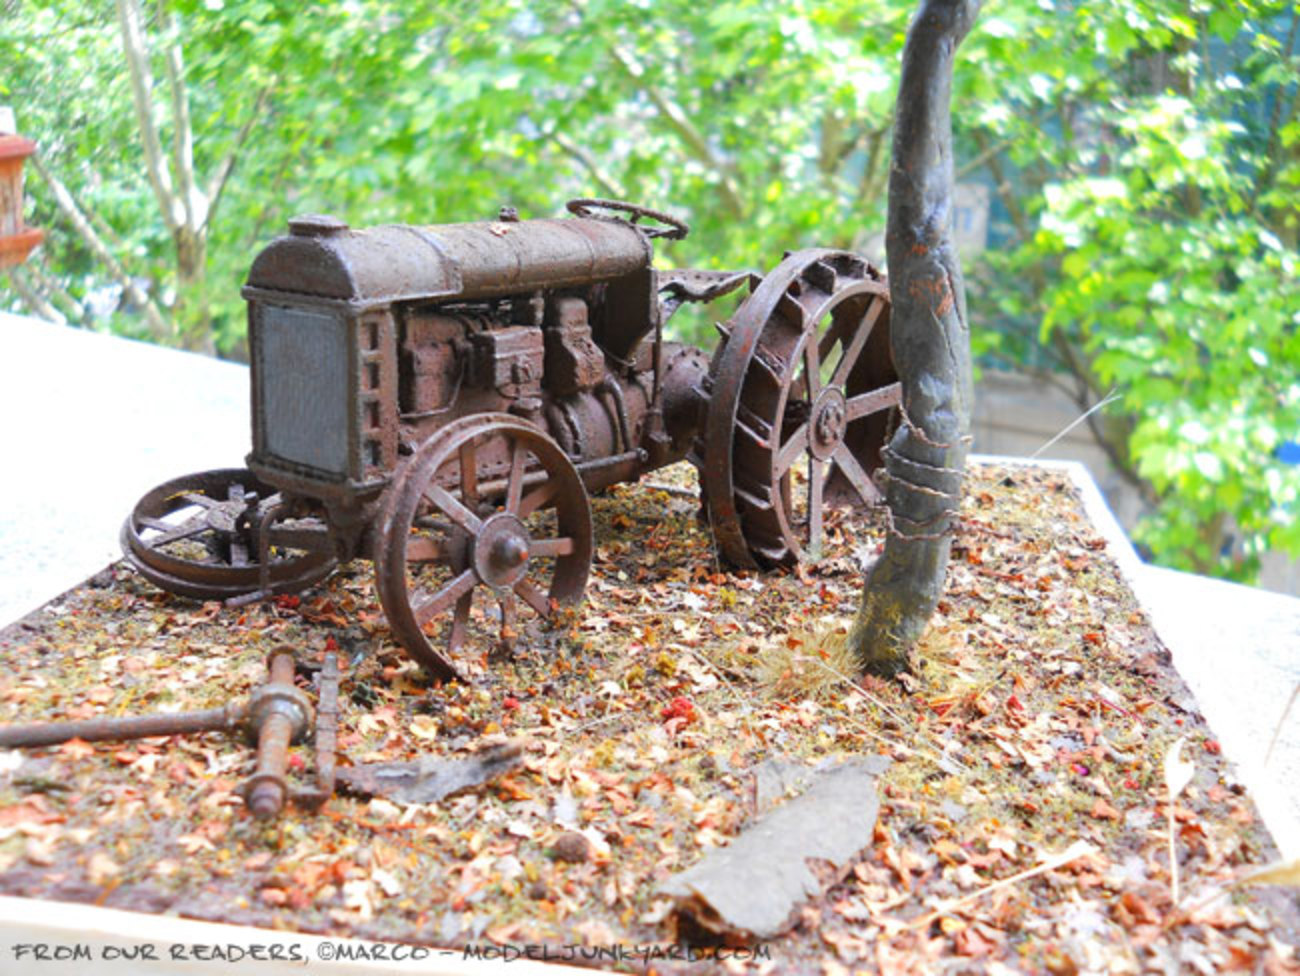 From our readers â€“ Marco's 1/16 1917 Fordson Model F tractor